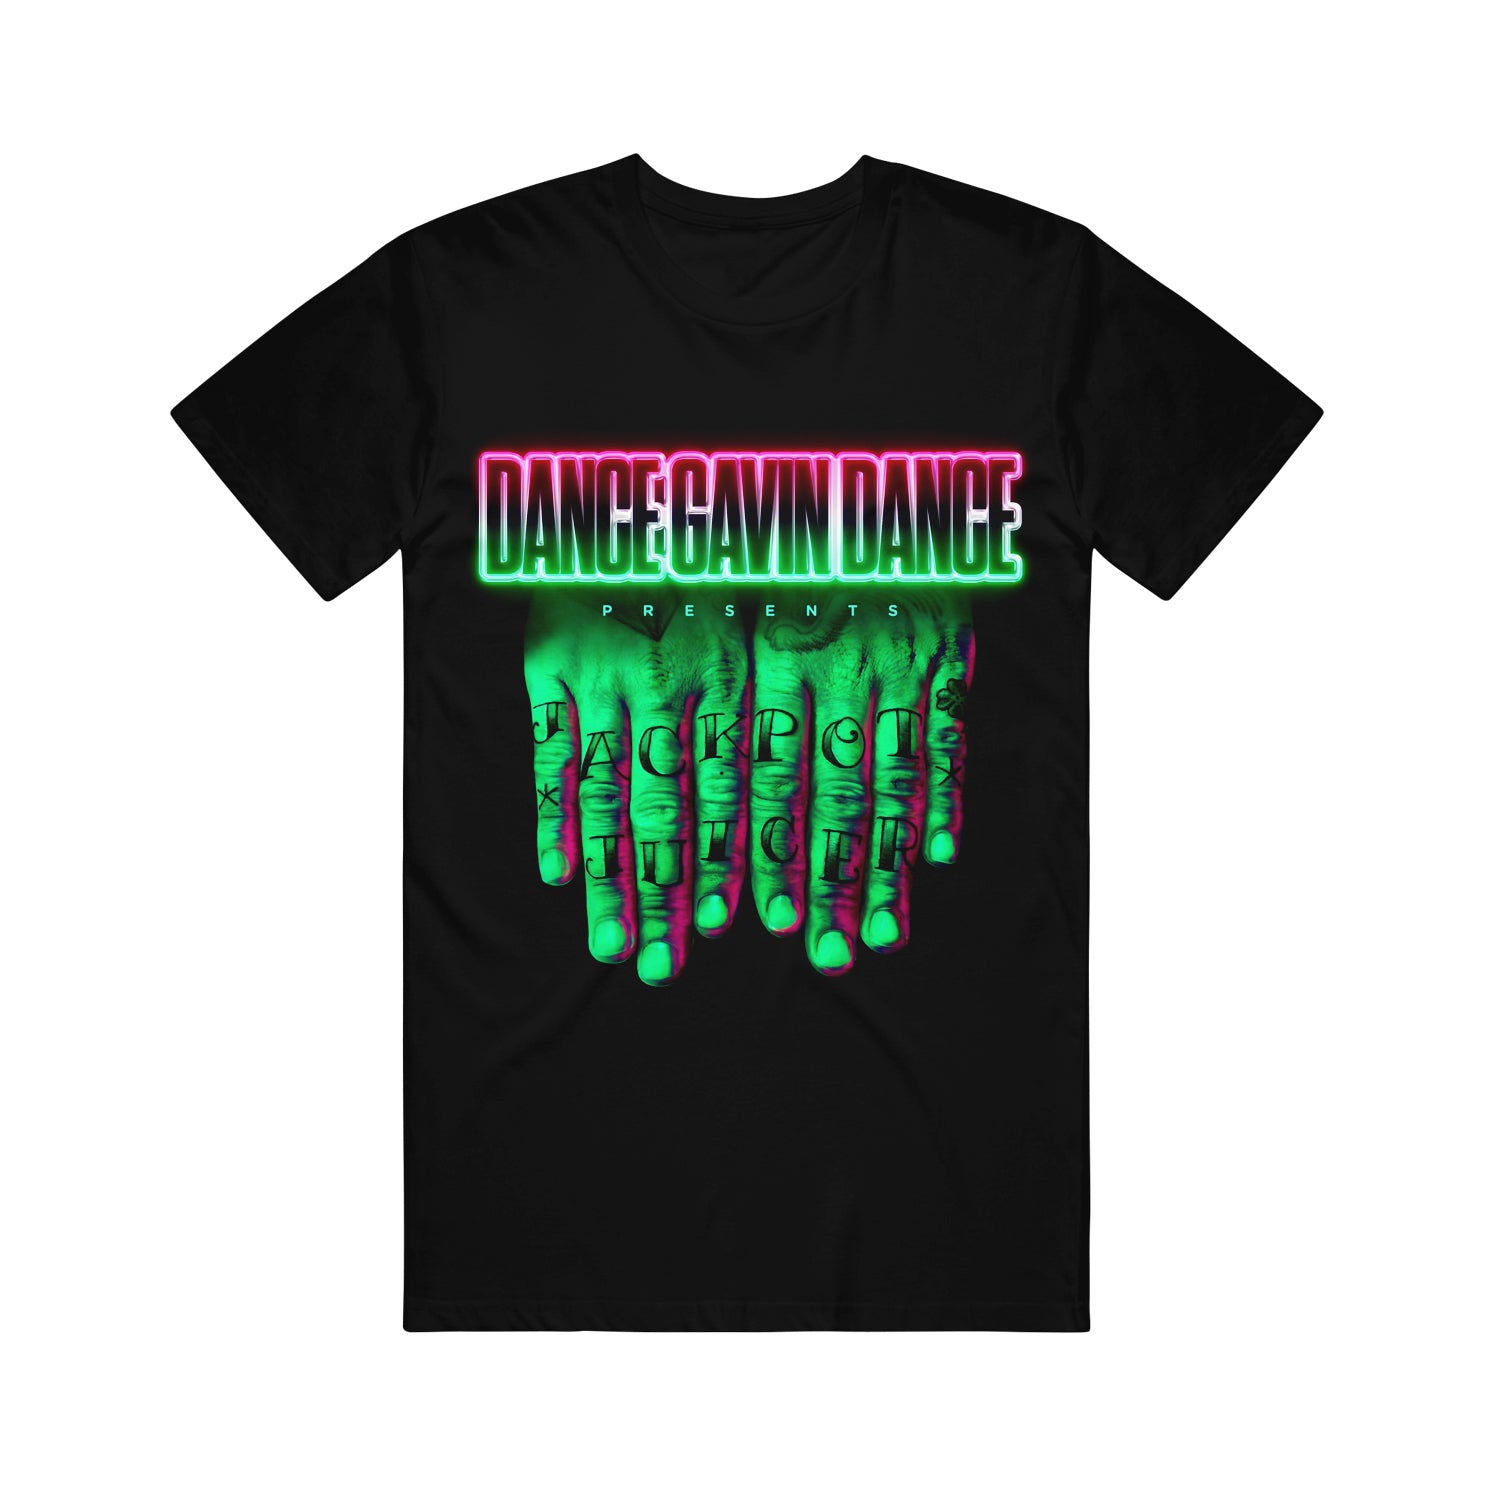 image of a black tee shirt on a white background. the tee has a full body print that says in pink and green at the top, dance gavin dance with hands laid in front and tattoos on the knuckles that say jackpot